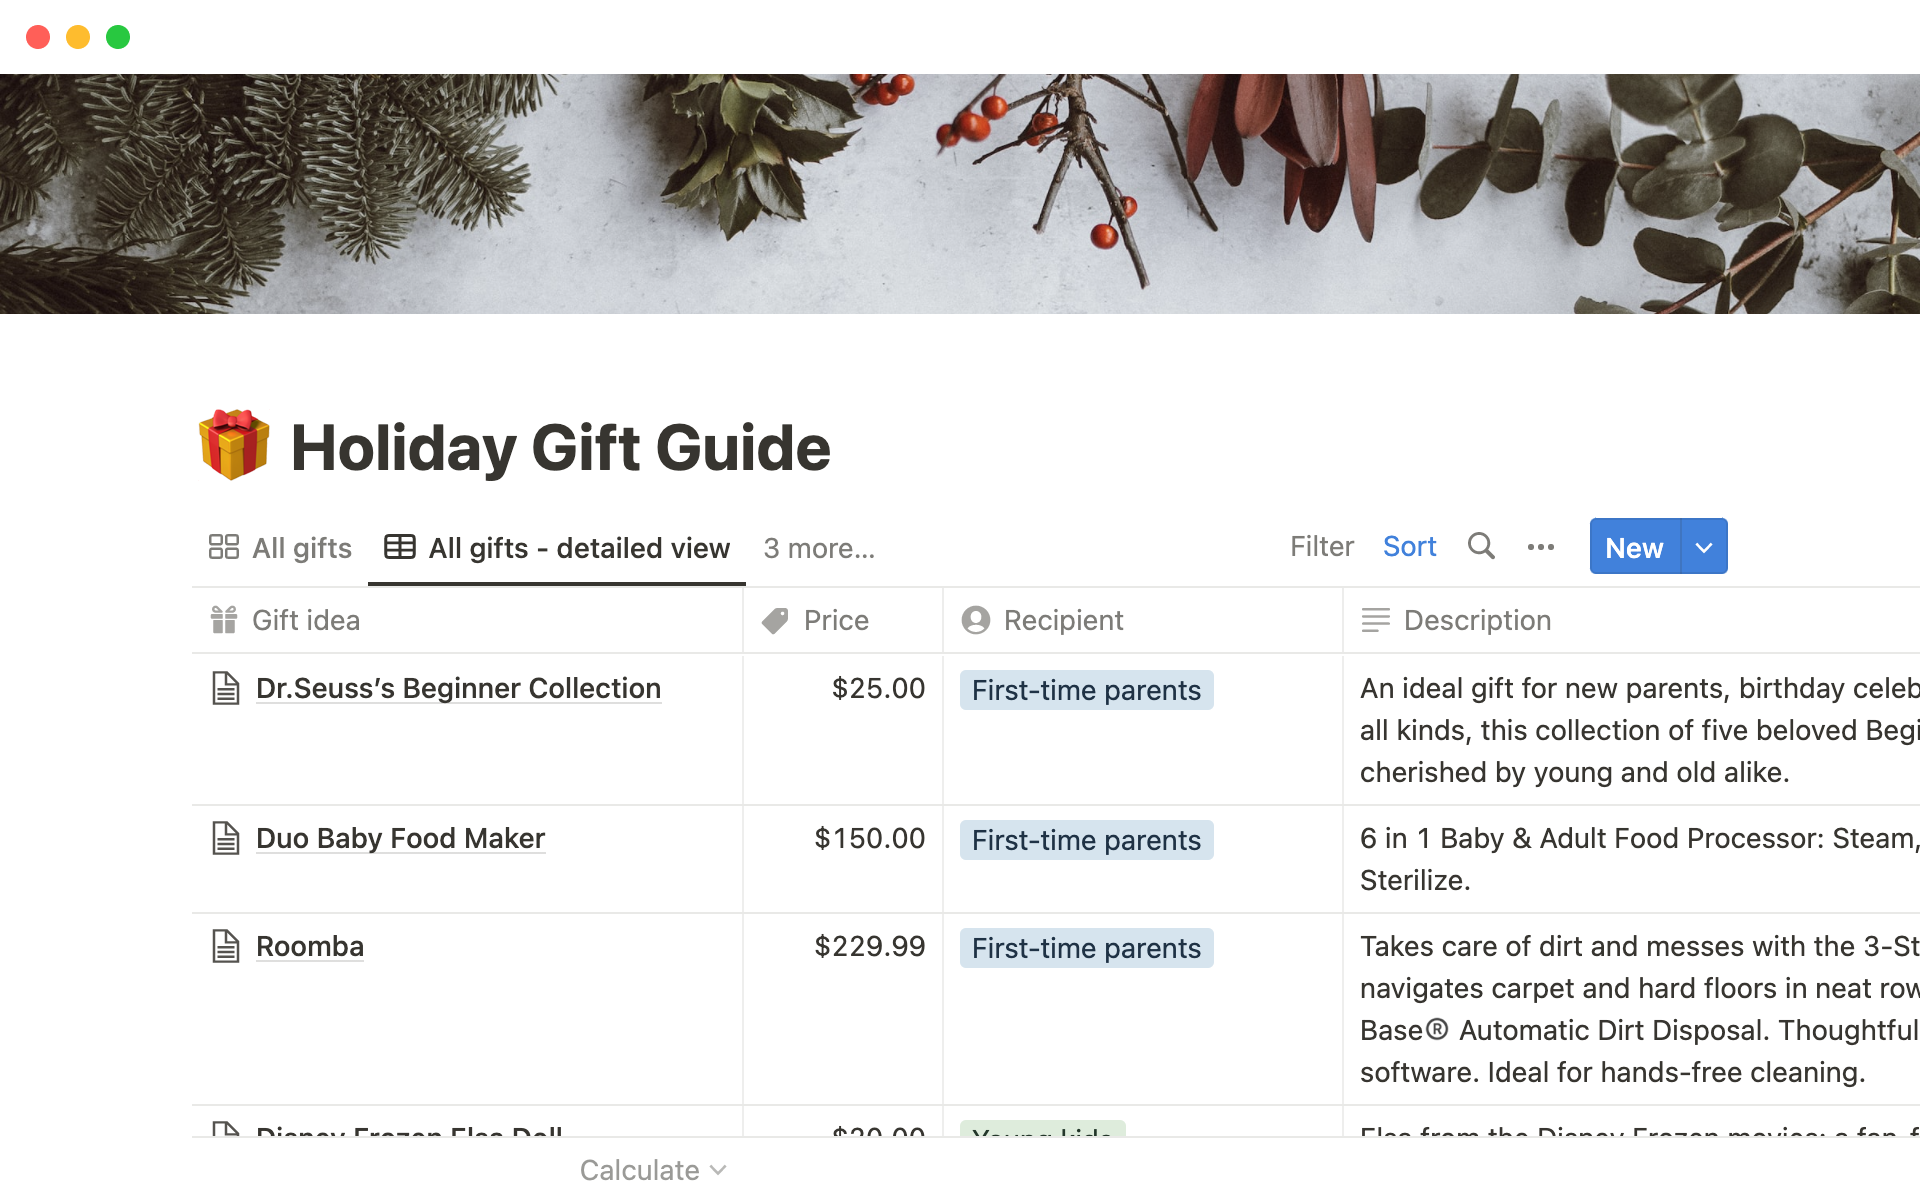 Add all your gift ideas along with their links, images, price, and recipient type in one public database.